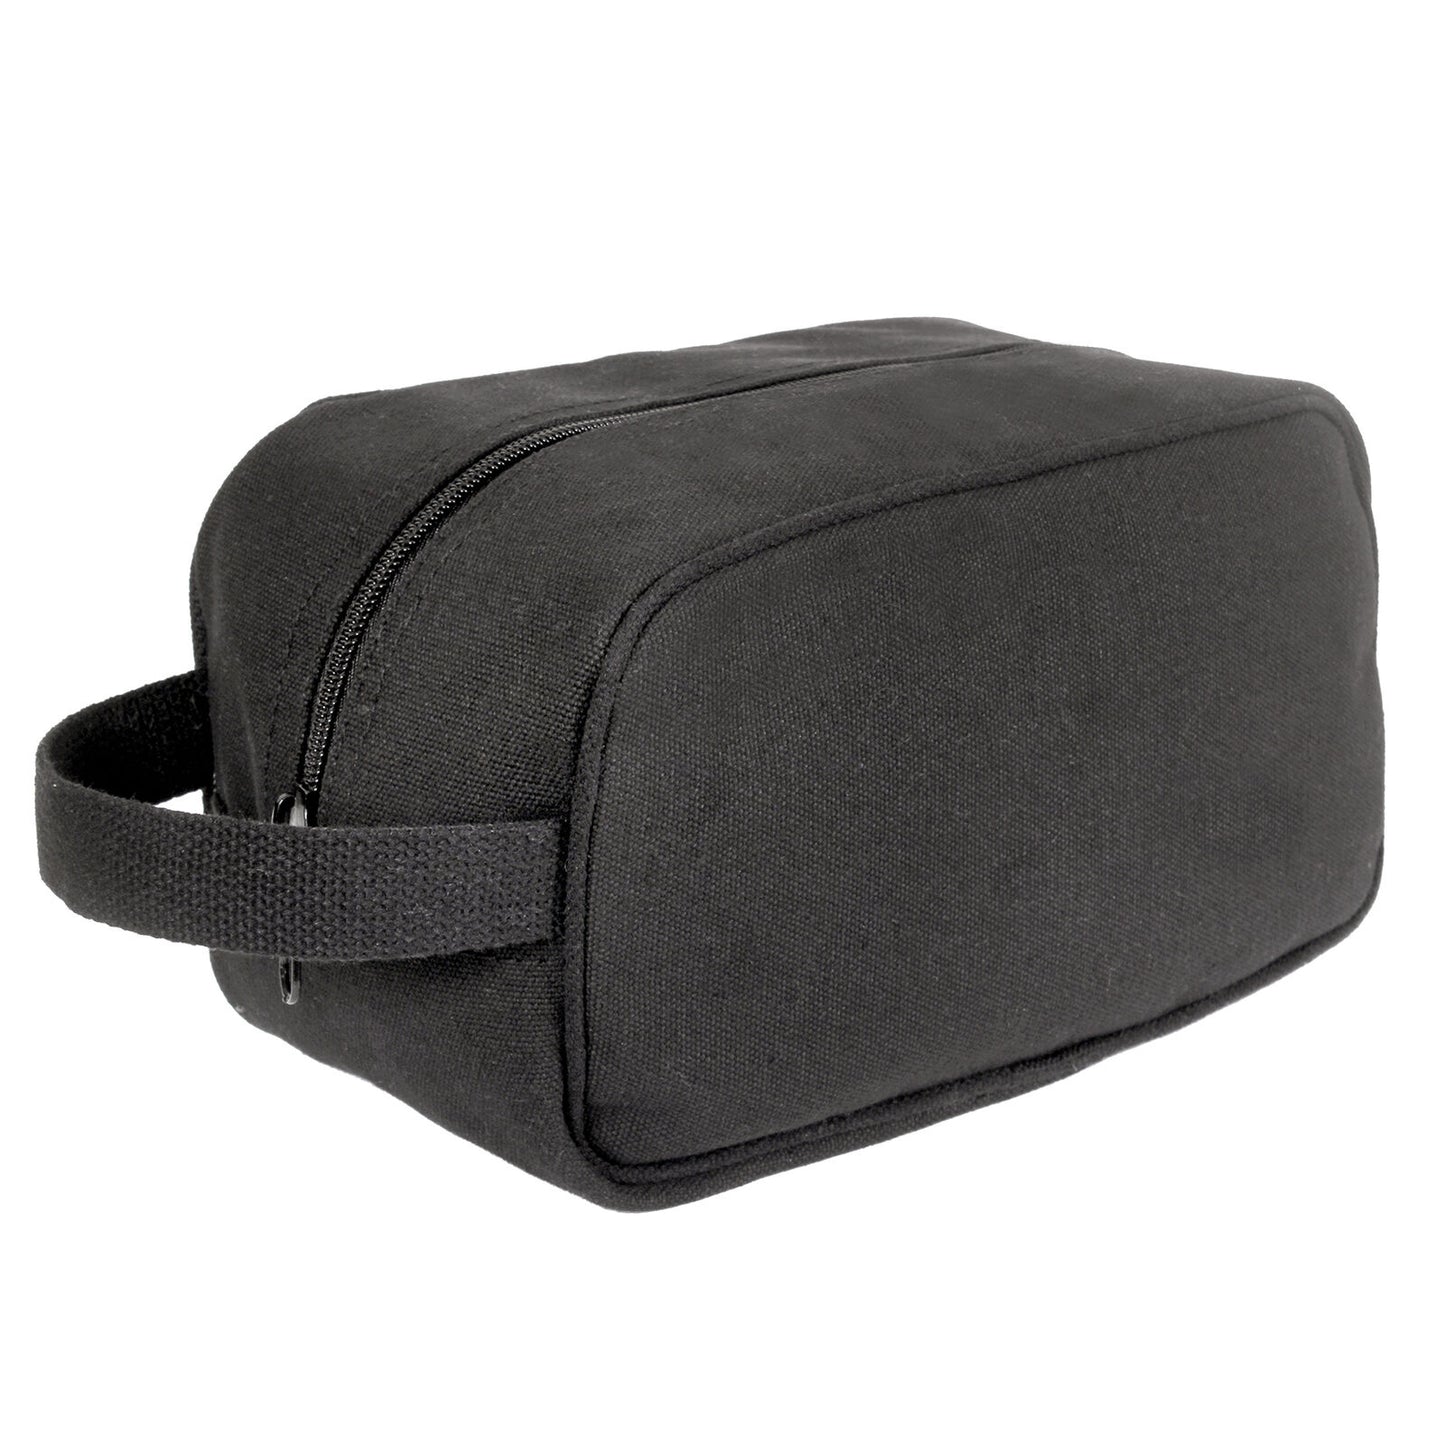 Charcoal Grey Tactical Travel Toiletry Bag Zippered Canvas